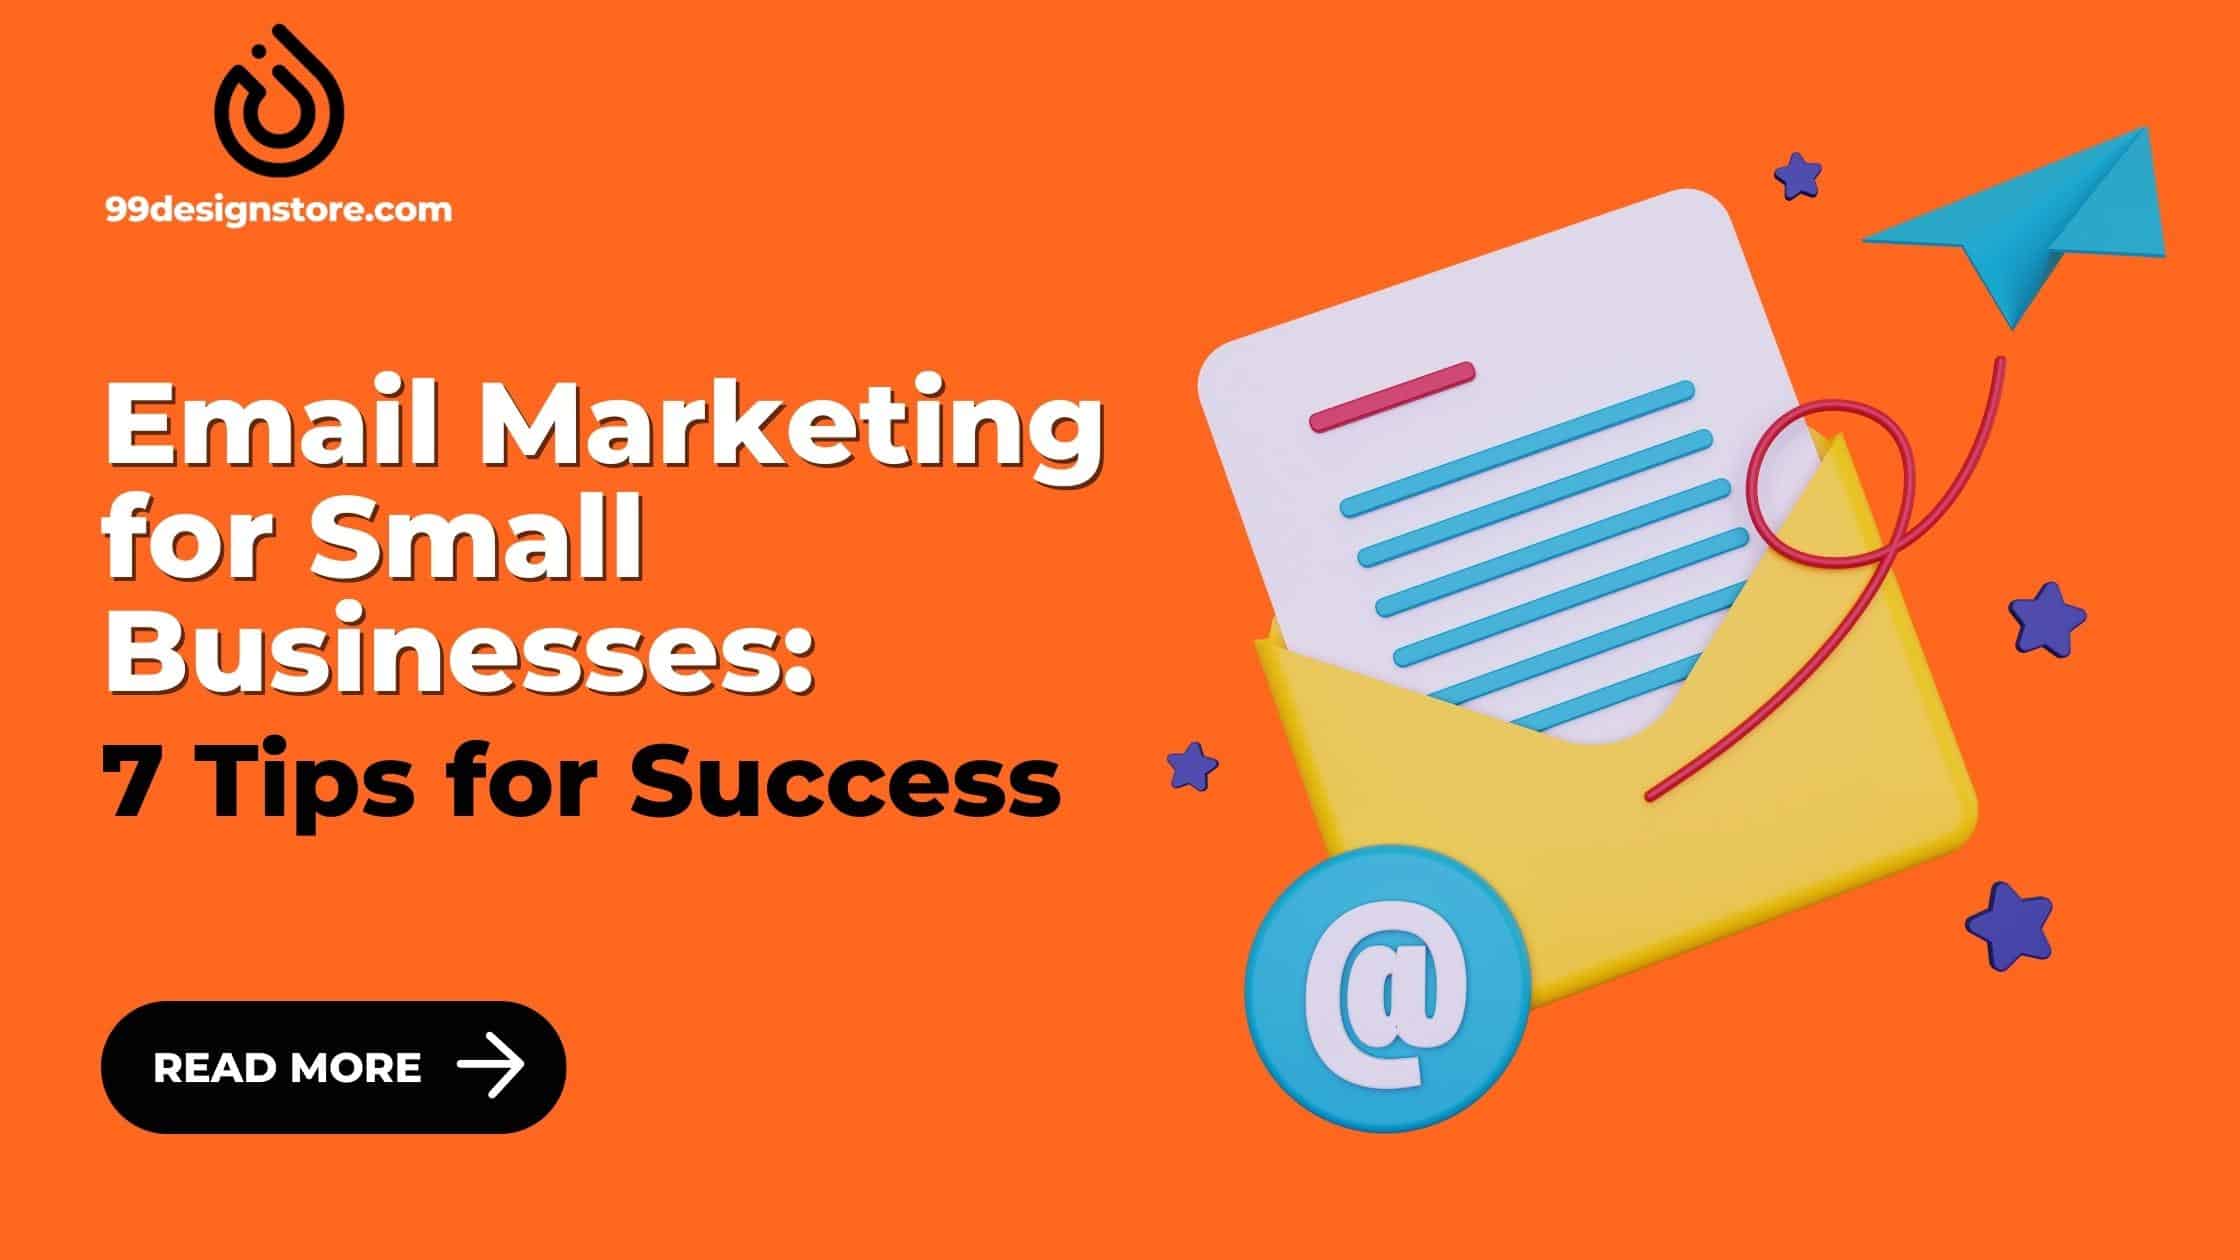 Email Marketing for Small Businesses - 7 Tips